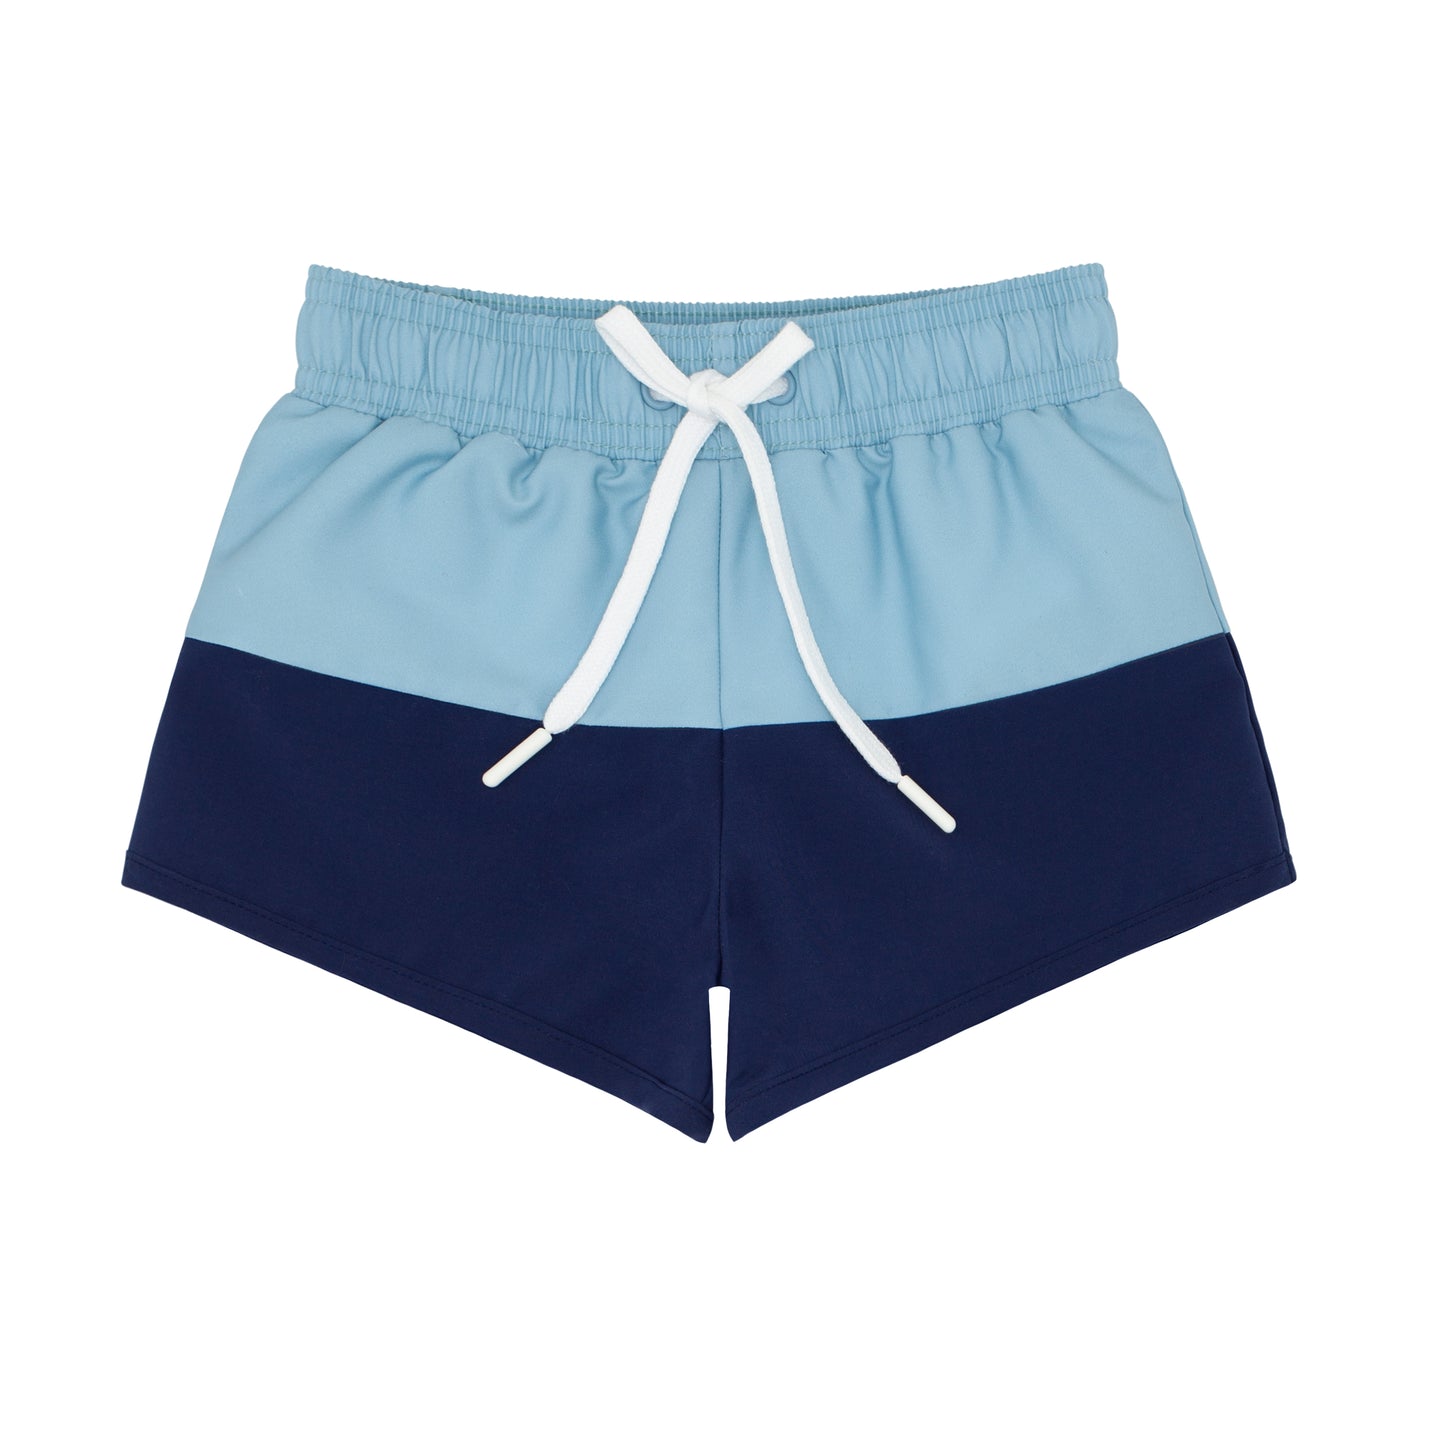 Minnow Boys Boardie Freshwater Blue and Navy Colorblock